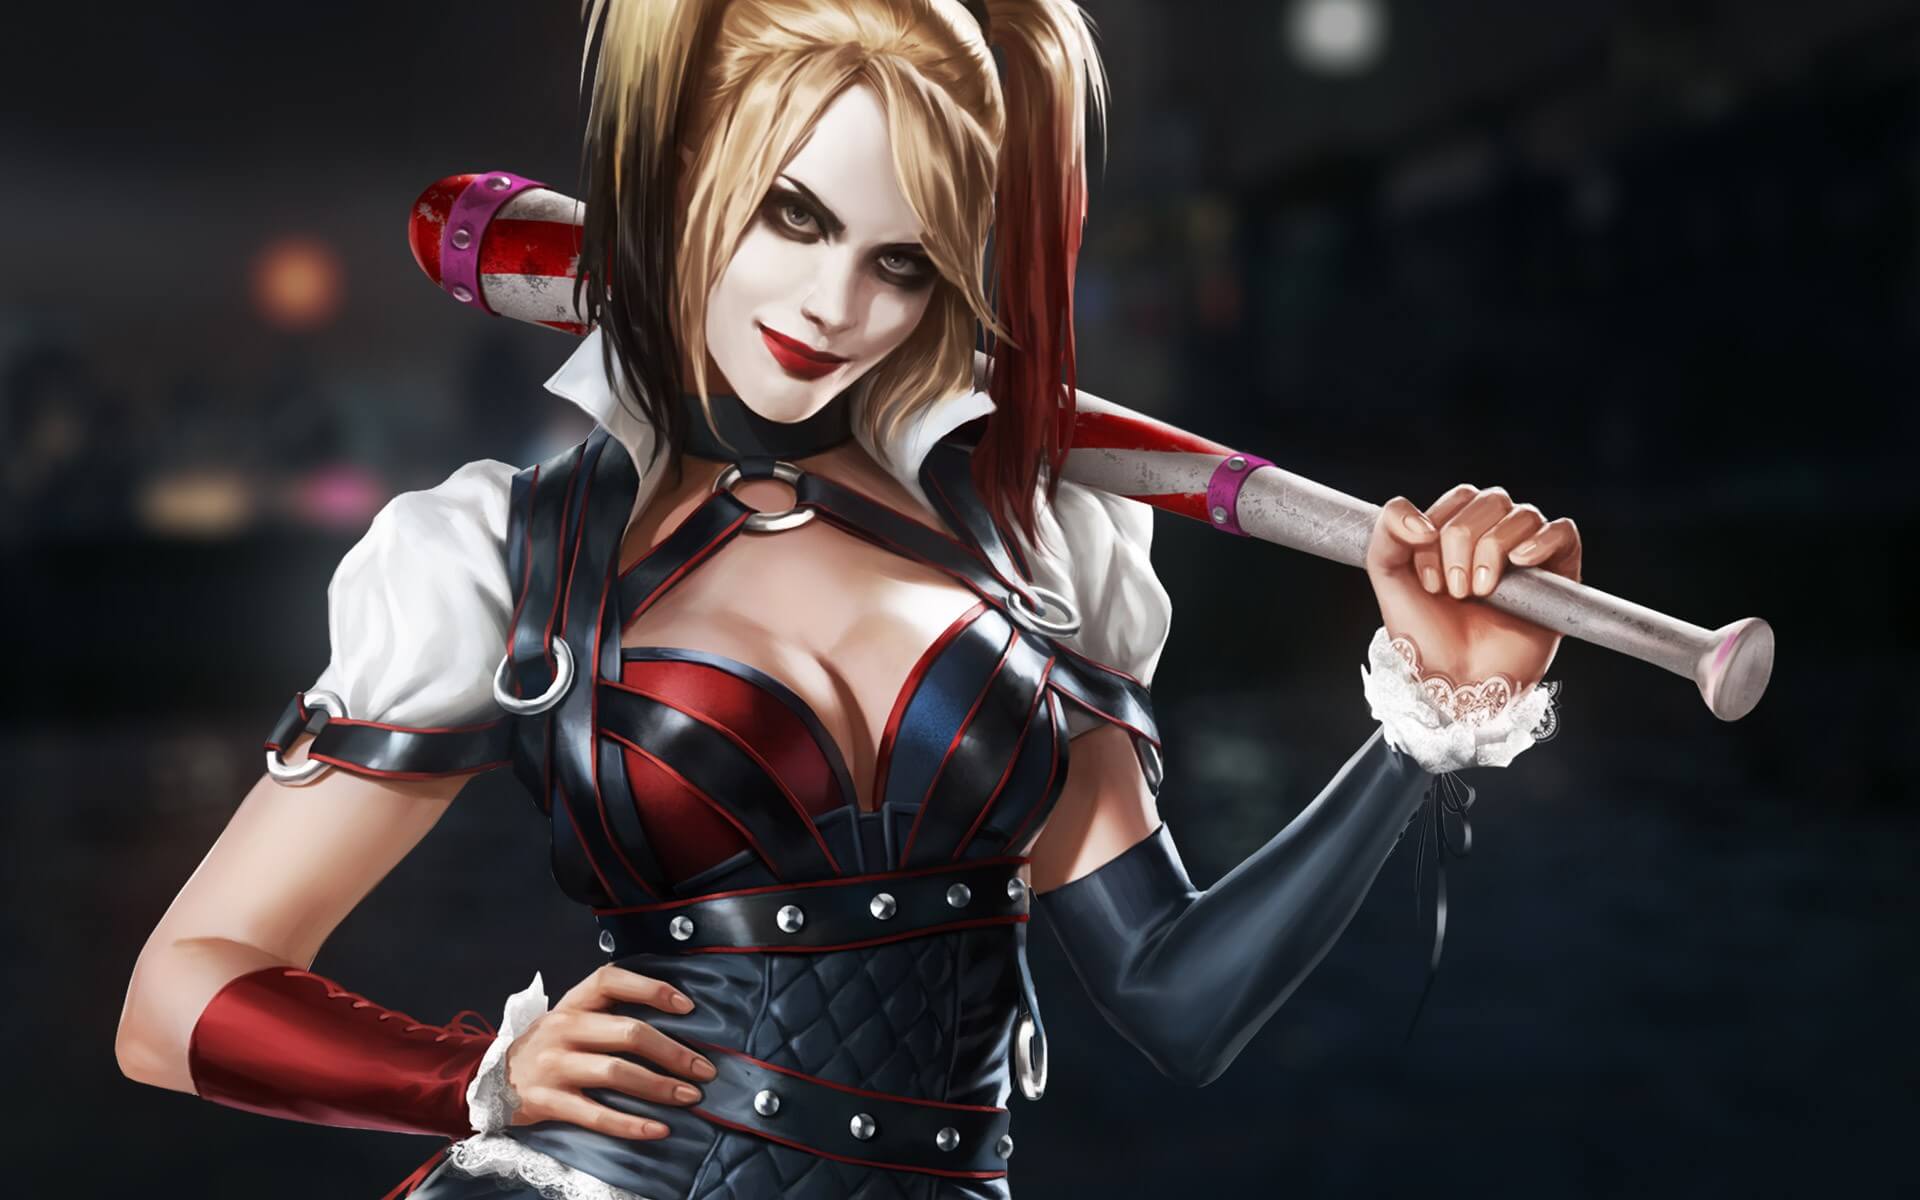 49 Hottest Harley Quinn Bikini Pictures Will Rock Your World | Best Of Comic Books